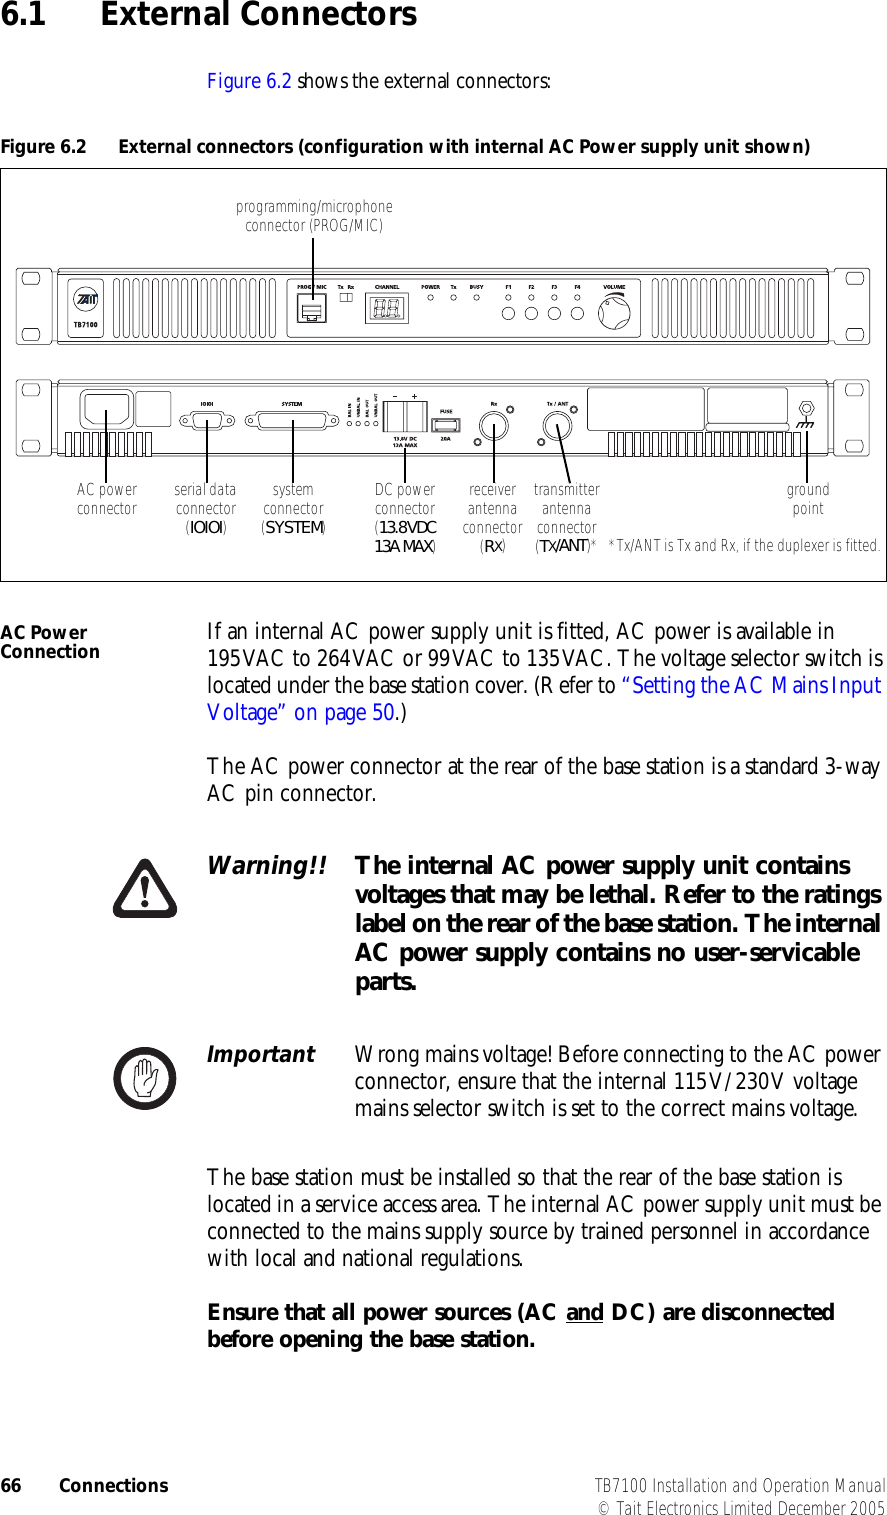  66 Connections TB7100 Installation and Operation Manual© Tait Electronics Limited December 20056.1 External ConnectorsFigure 6.2 shows the external connectors:AC Power Connection If an internal AC power supply unit is fitted, AC power is available in 195VAC to 264VAC or 99VAC to 135VAC. The voltage selector switch is located under the base station cover. (Refer to “Setting the AC Mains Input Voltage” on page 50.)The AC power connector at the rear of the base station is a standard 3-way AC pin connector.Warning!! The internal AC power supply unit contains voltages that may be lethal. Refer to the ratings label on the rear of the base station. The internal AC power supply contains no user-servicable parts.Important Wrong mains voltage! Before connecting to the AC power connector, ensure that the internal 115V/230V voltage mains selector switch is set to the correct mains voltage.The base station must be installed so that the rear of the base station is located in a service access area. The internal AC power supply unit must be connected to the mains supply source by trained personnel in accordance with local and national regulations.Ensure that all power sources (AC and DC) are disconnected before opening the base station.Figure 6.2 External connectors (configuration with internal AC Power supply unit shown)programming/microphone connector (PROG/MIC)groundpointserial data connector(IOIOI)system connector(SYSTEM)DC power connector(13.8VDC 13A MAX)receiver antenna connector(RX)transmitter antennaconnector(TX/ANT)* *Tx/ANT is Tx and Rx, if the duplexer is fitted.AC power connector